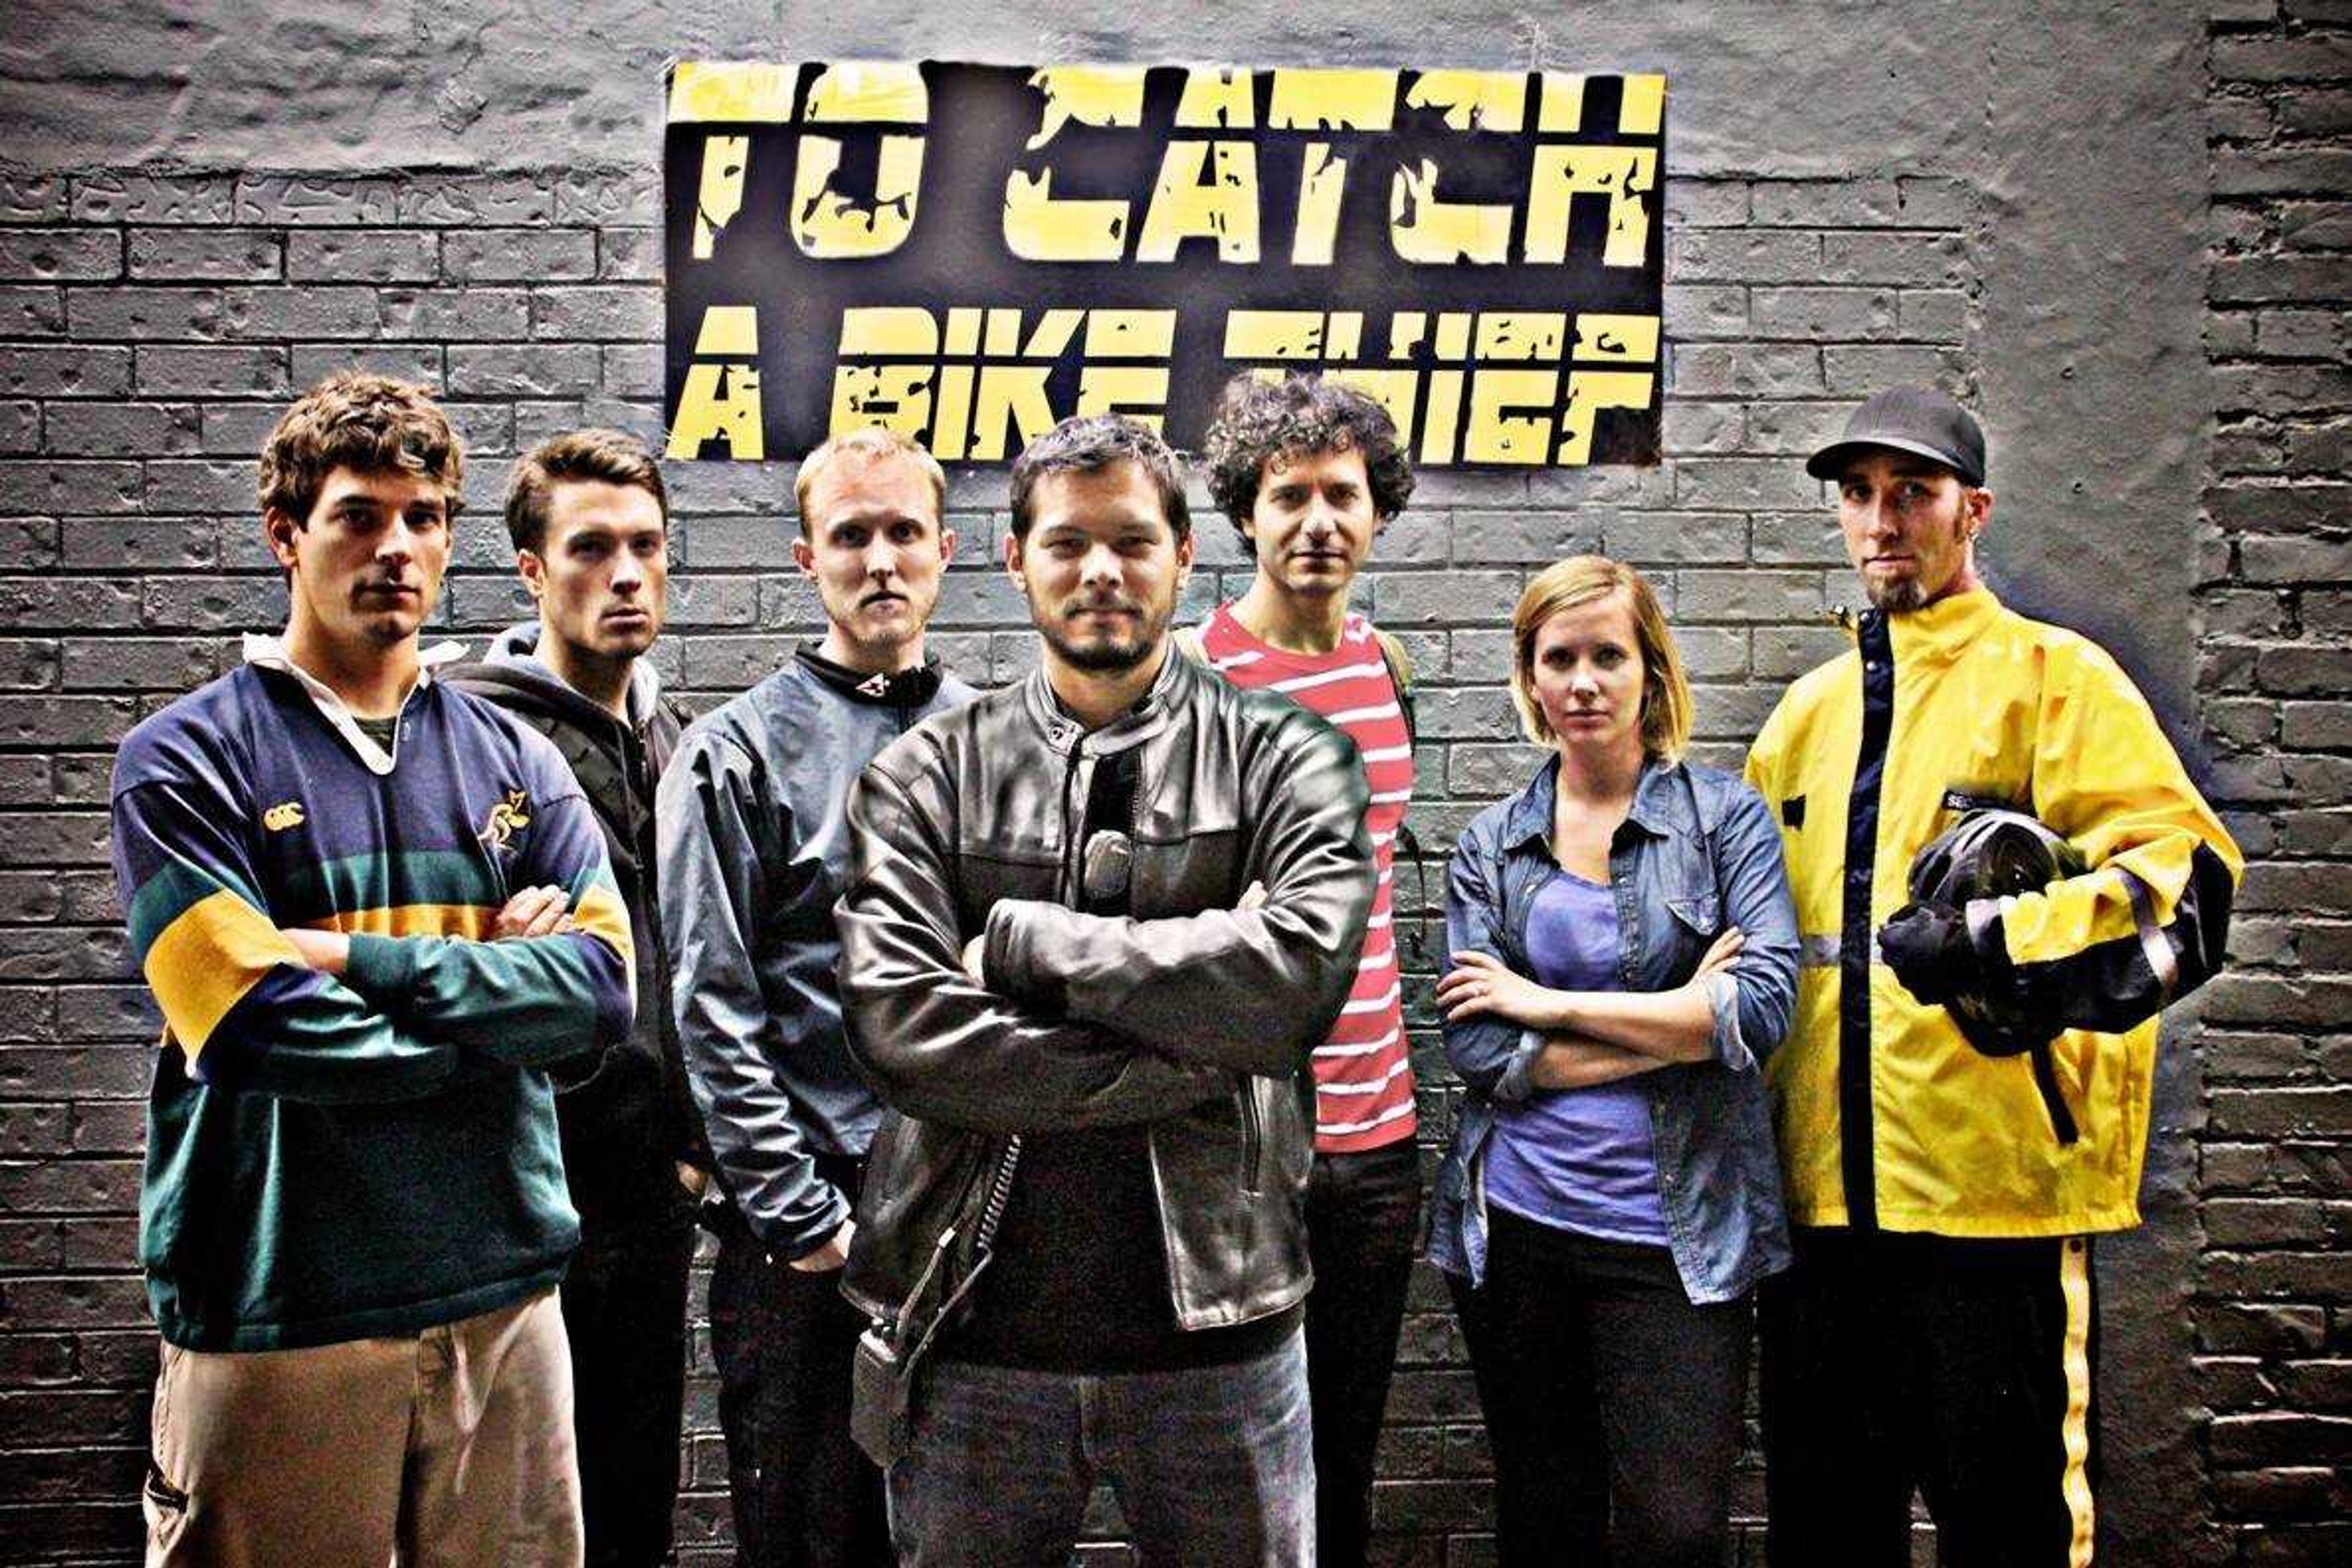 Web series is made to stop bike theft